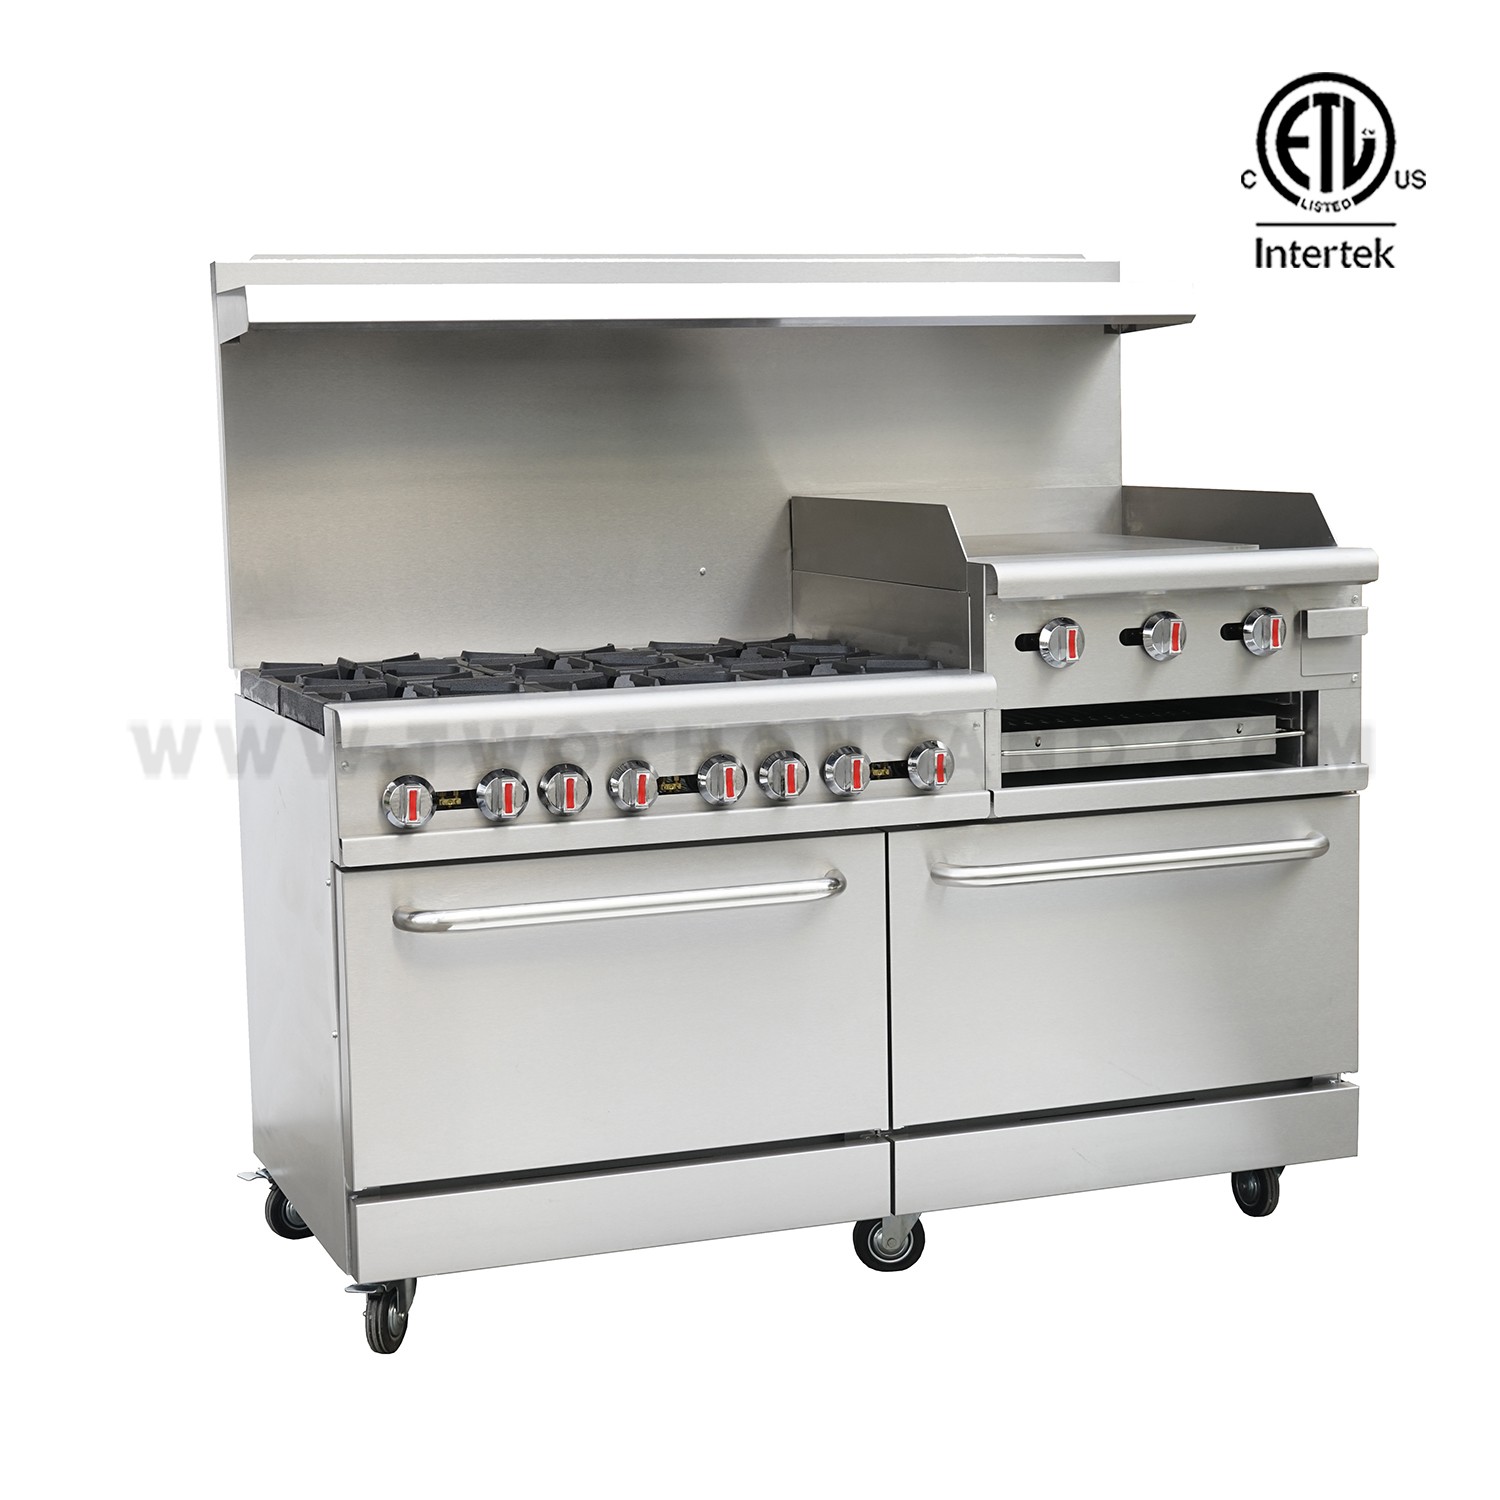 NEW 60" Double Oven Range Combo Griddle Cheese Melter 6 Burner Hot Plate NSF